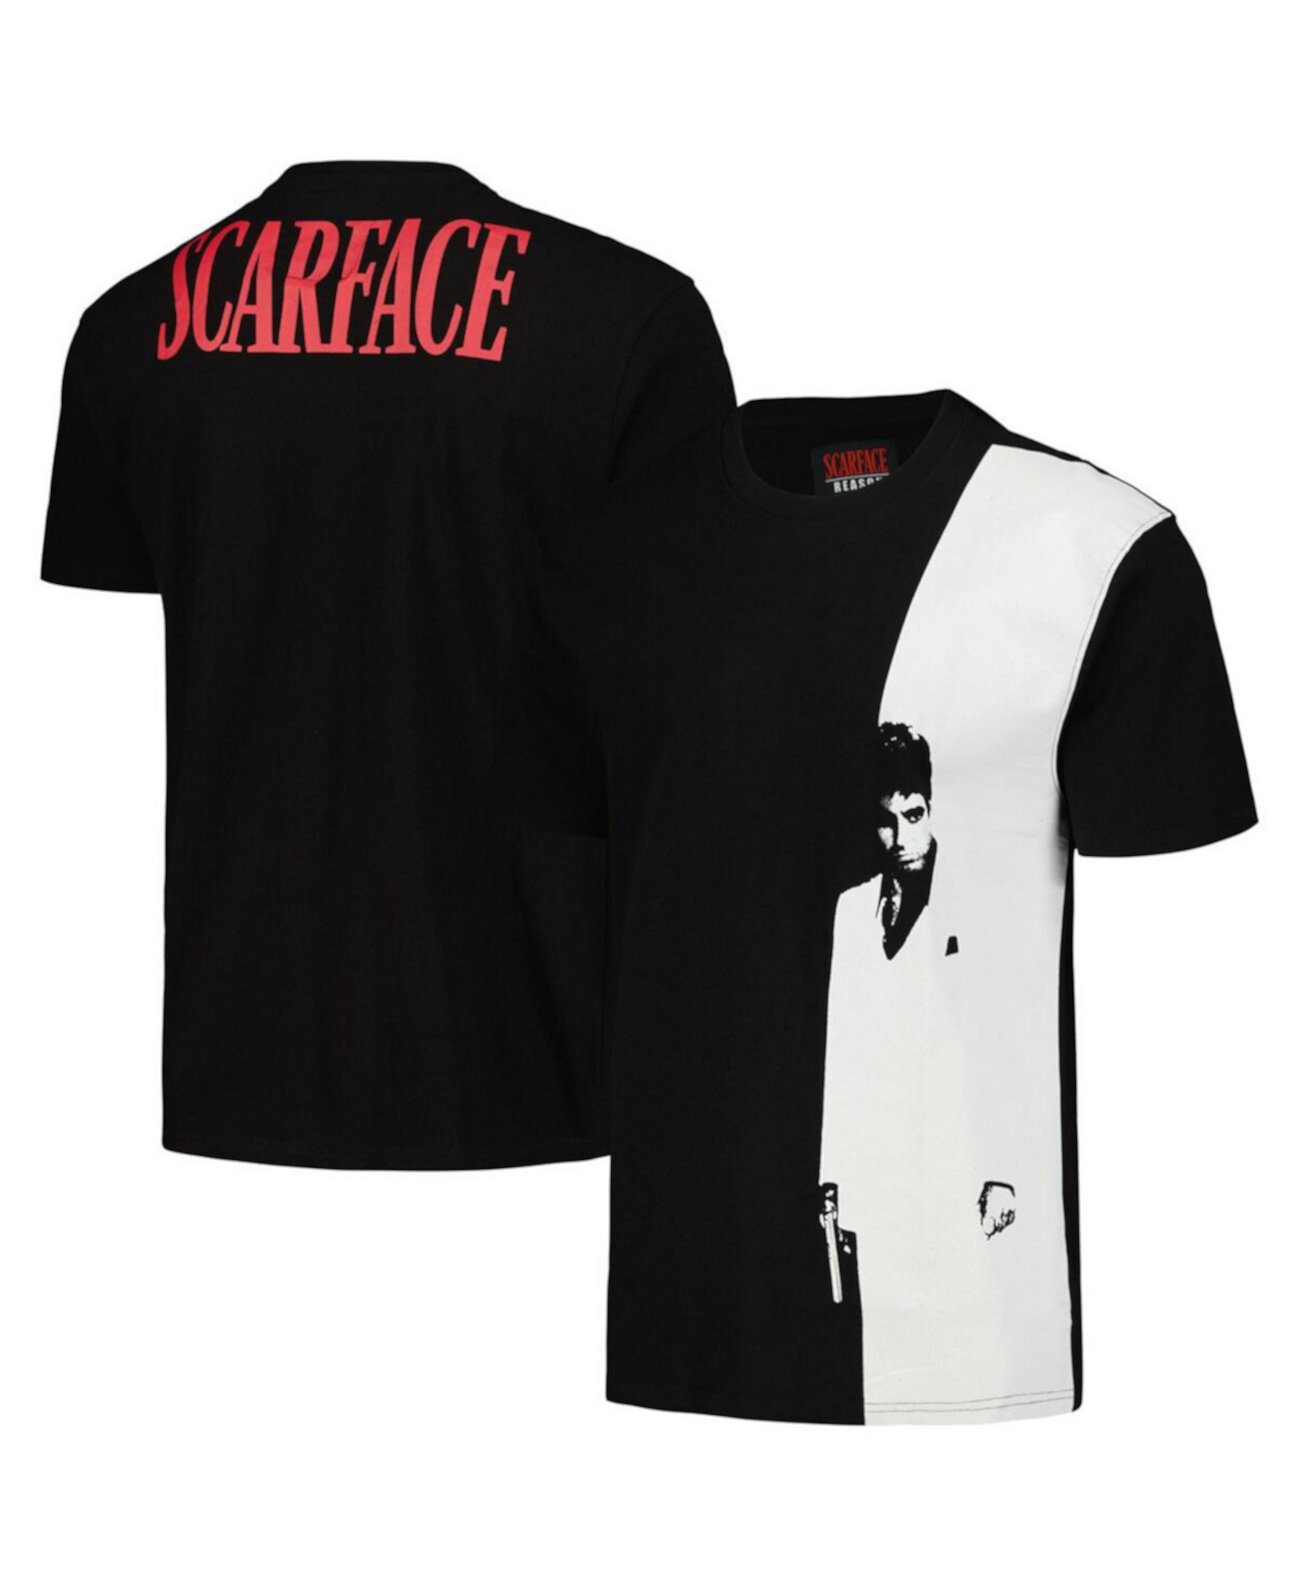 Men's and Women's Black Scarface Cover Art T-Shirt Reason